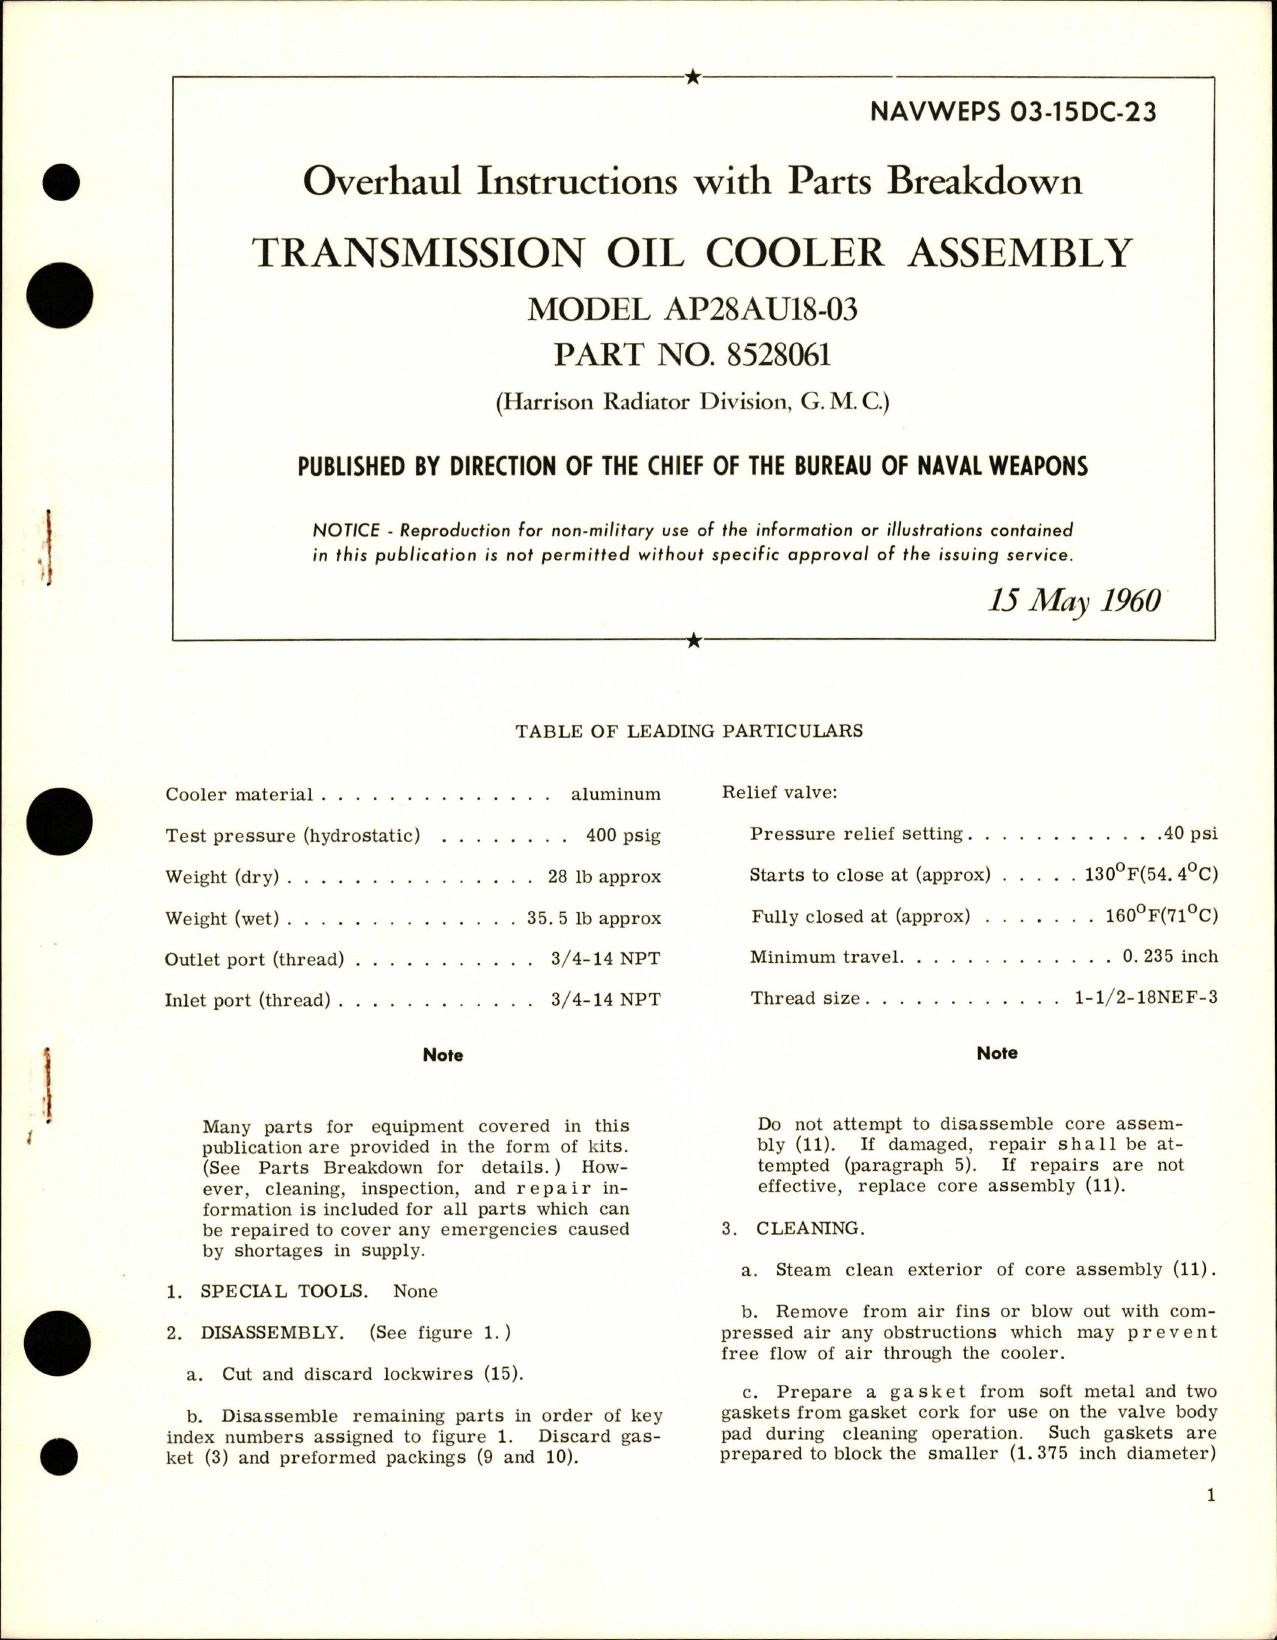 Sample page 1 from AirCorps Library document: Overhaul Instructions with Parts for Transmission Oil Cooler Assembly - Model AP28AU18-03 - Part 8528061